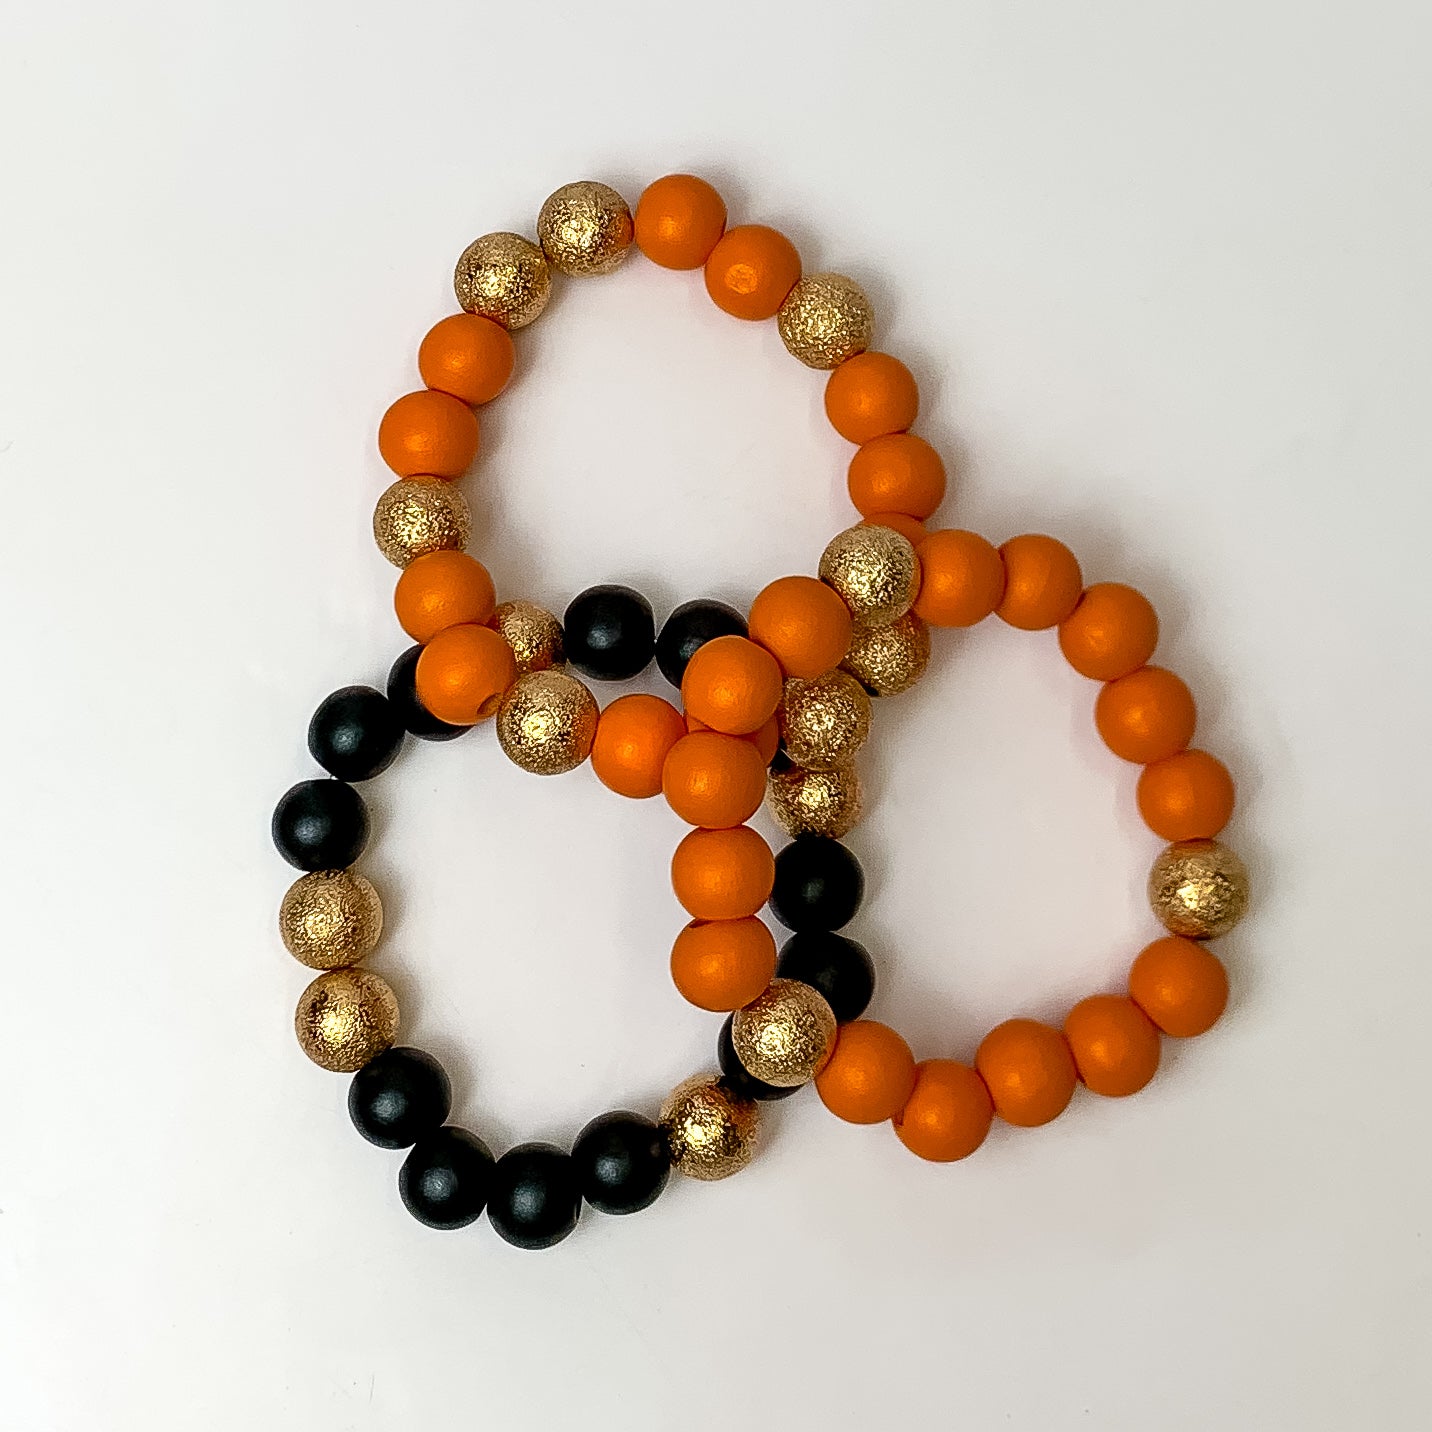 Spooky Set of 3 Stretchy Beaded Bracelets in Orange and Black - Giddy Up Glamour Boutique